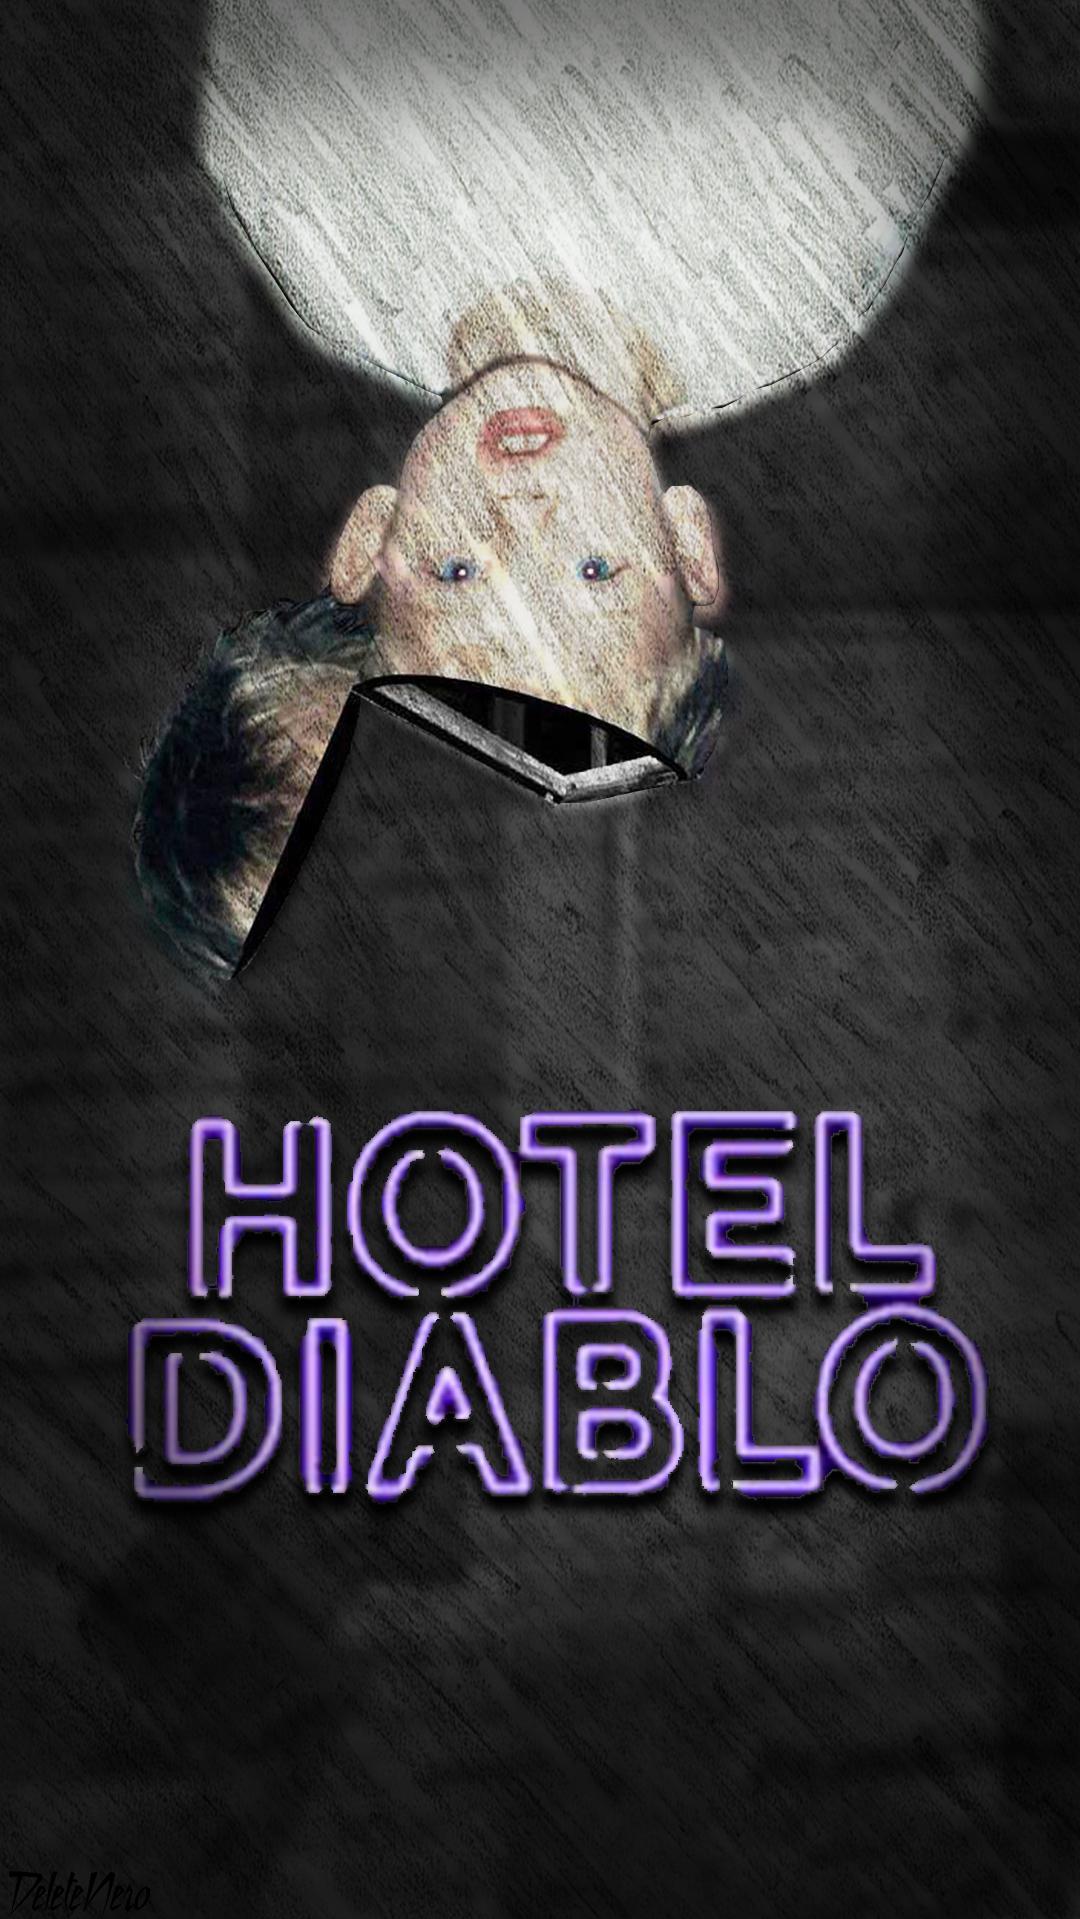 Decided To Take Hotel Diablo S Album Cover And Turn It Into A